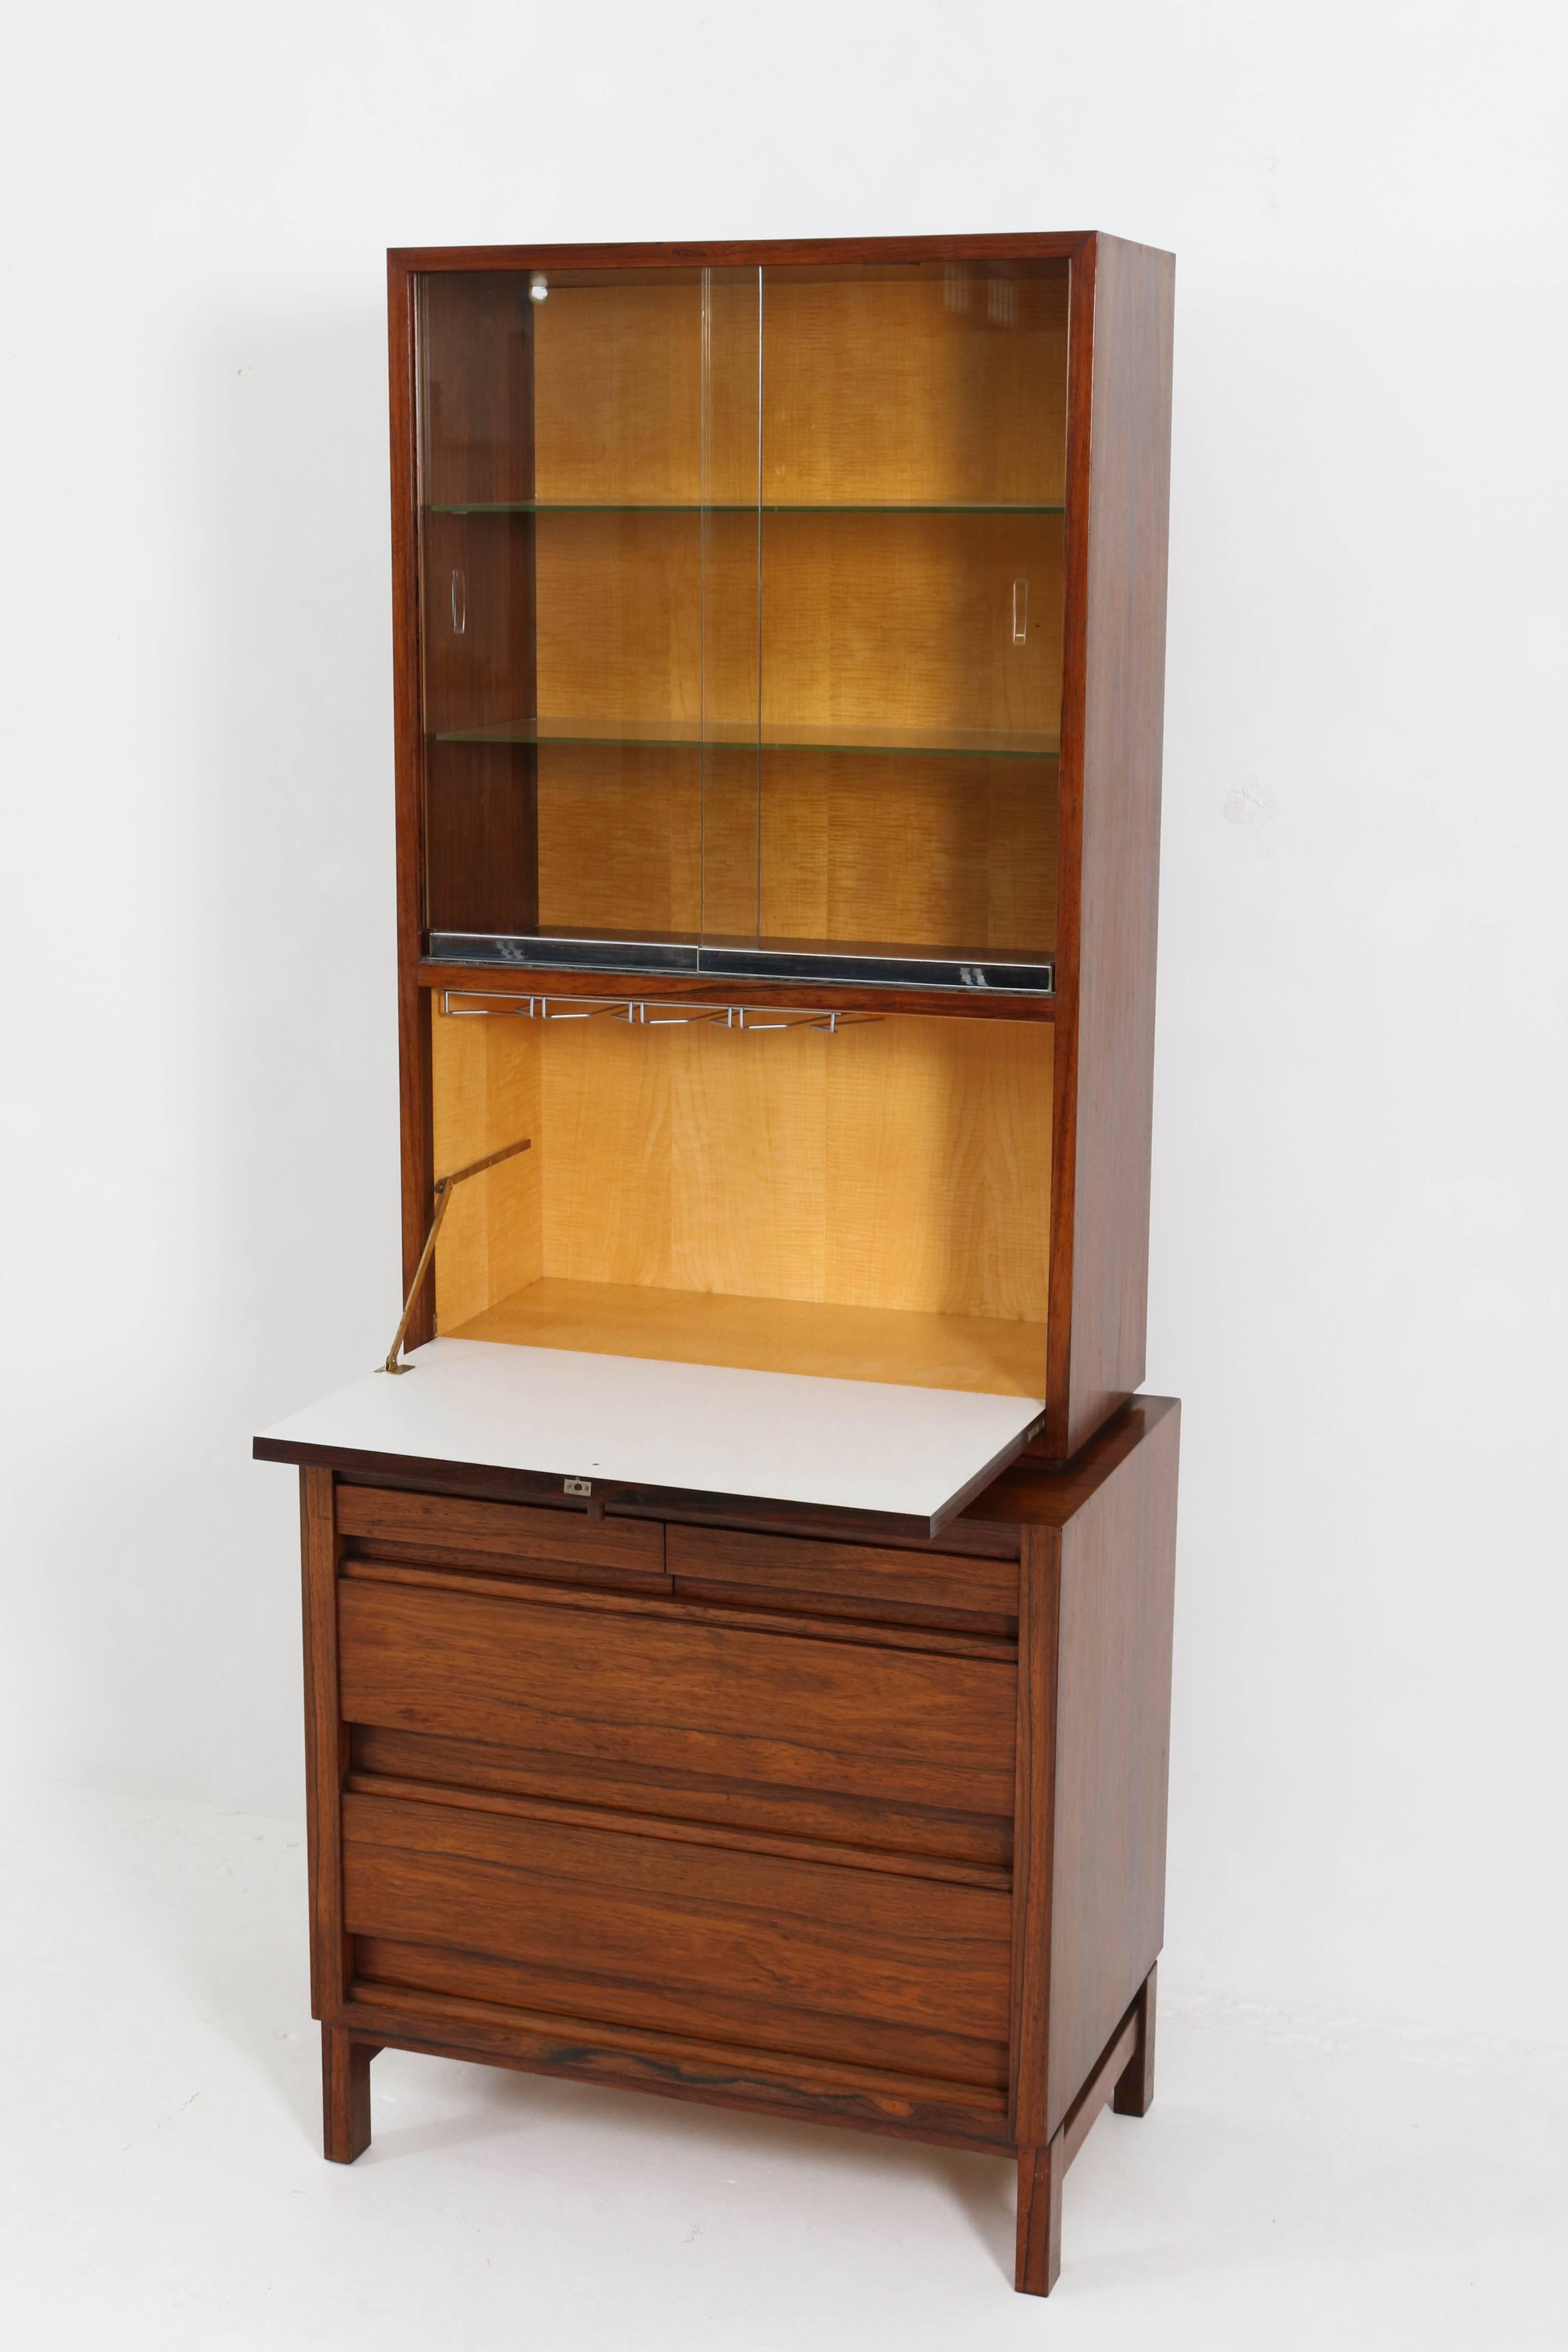 Rare Mid-Century Modern bar cabinet, 1960s.
Rosewood and rosewood veneer.
Original glass sliding doors.
In the two big drawers, you can store 10 bottles of wine etc.
In good original condition with minor wear consistent with age and